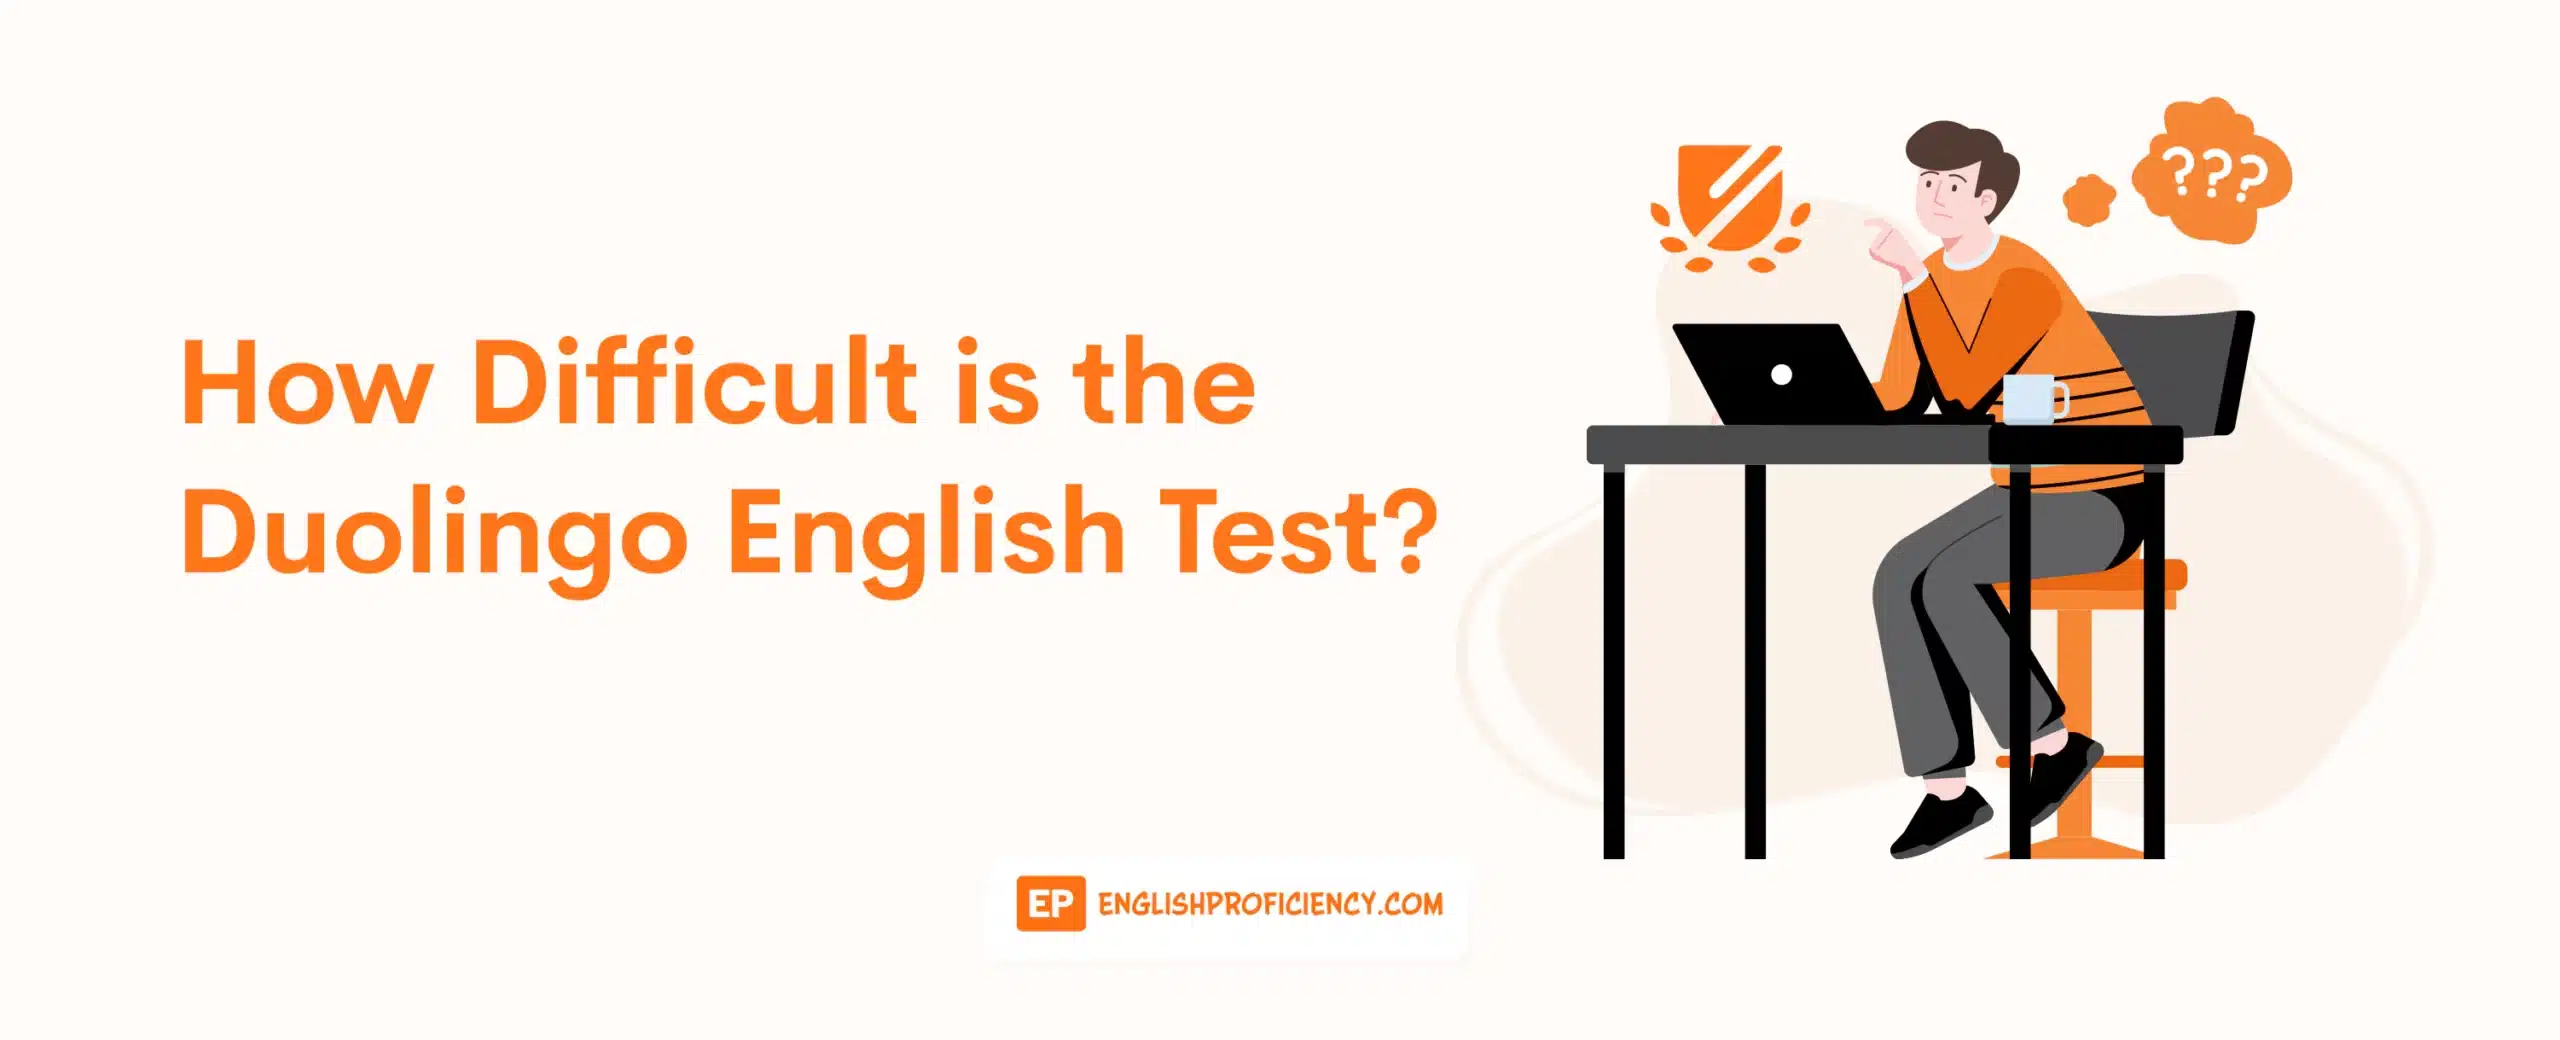 How Difficult is the Duolingo English Test